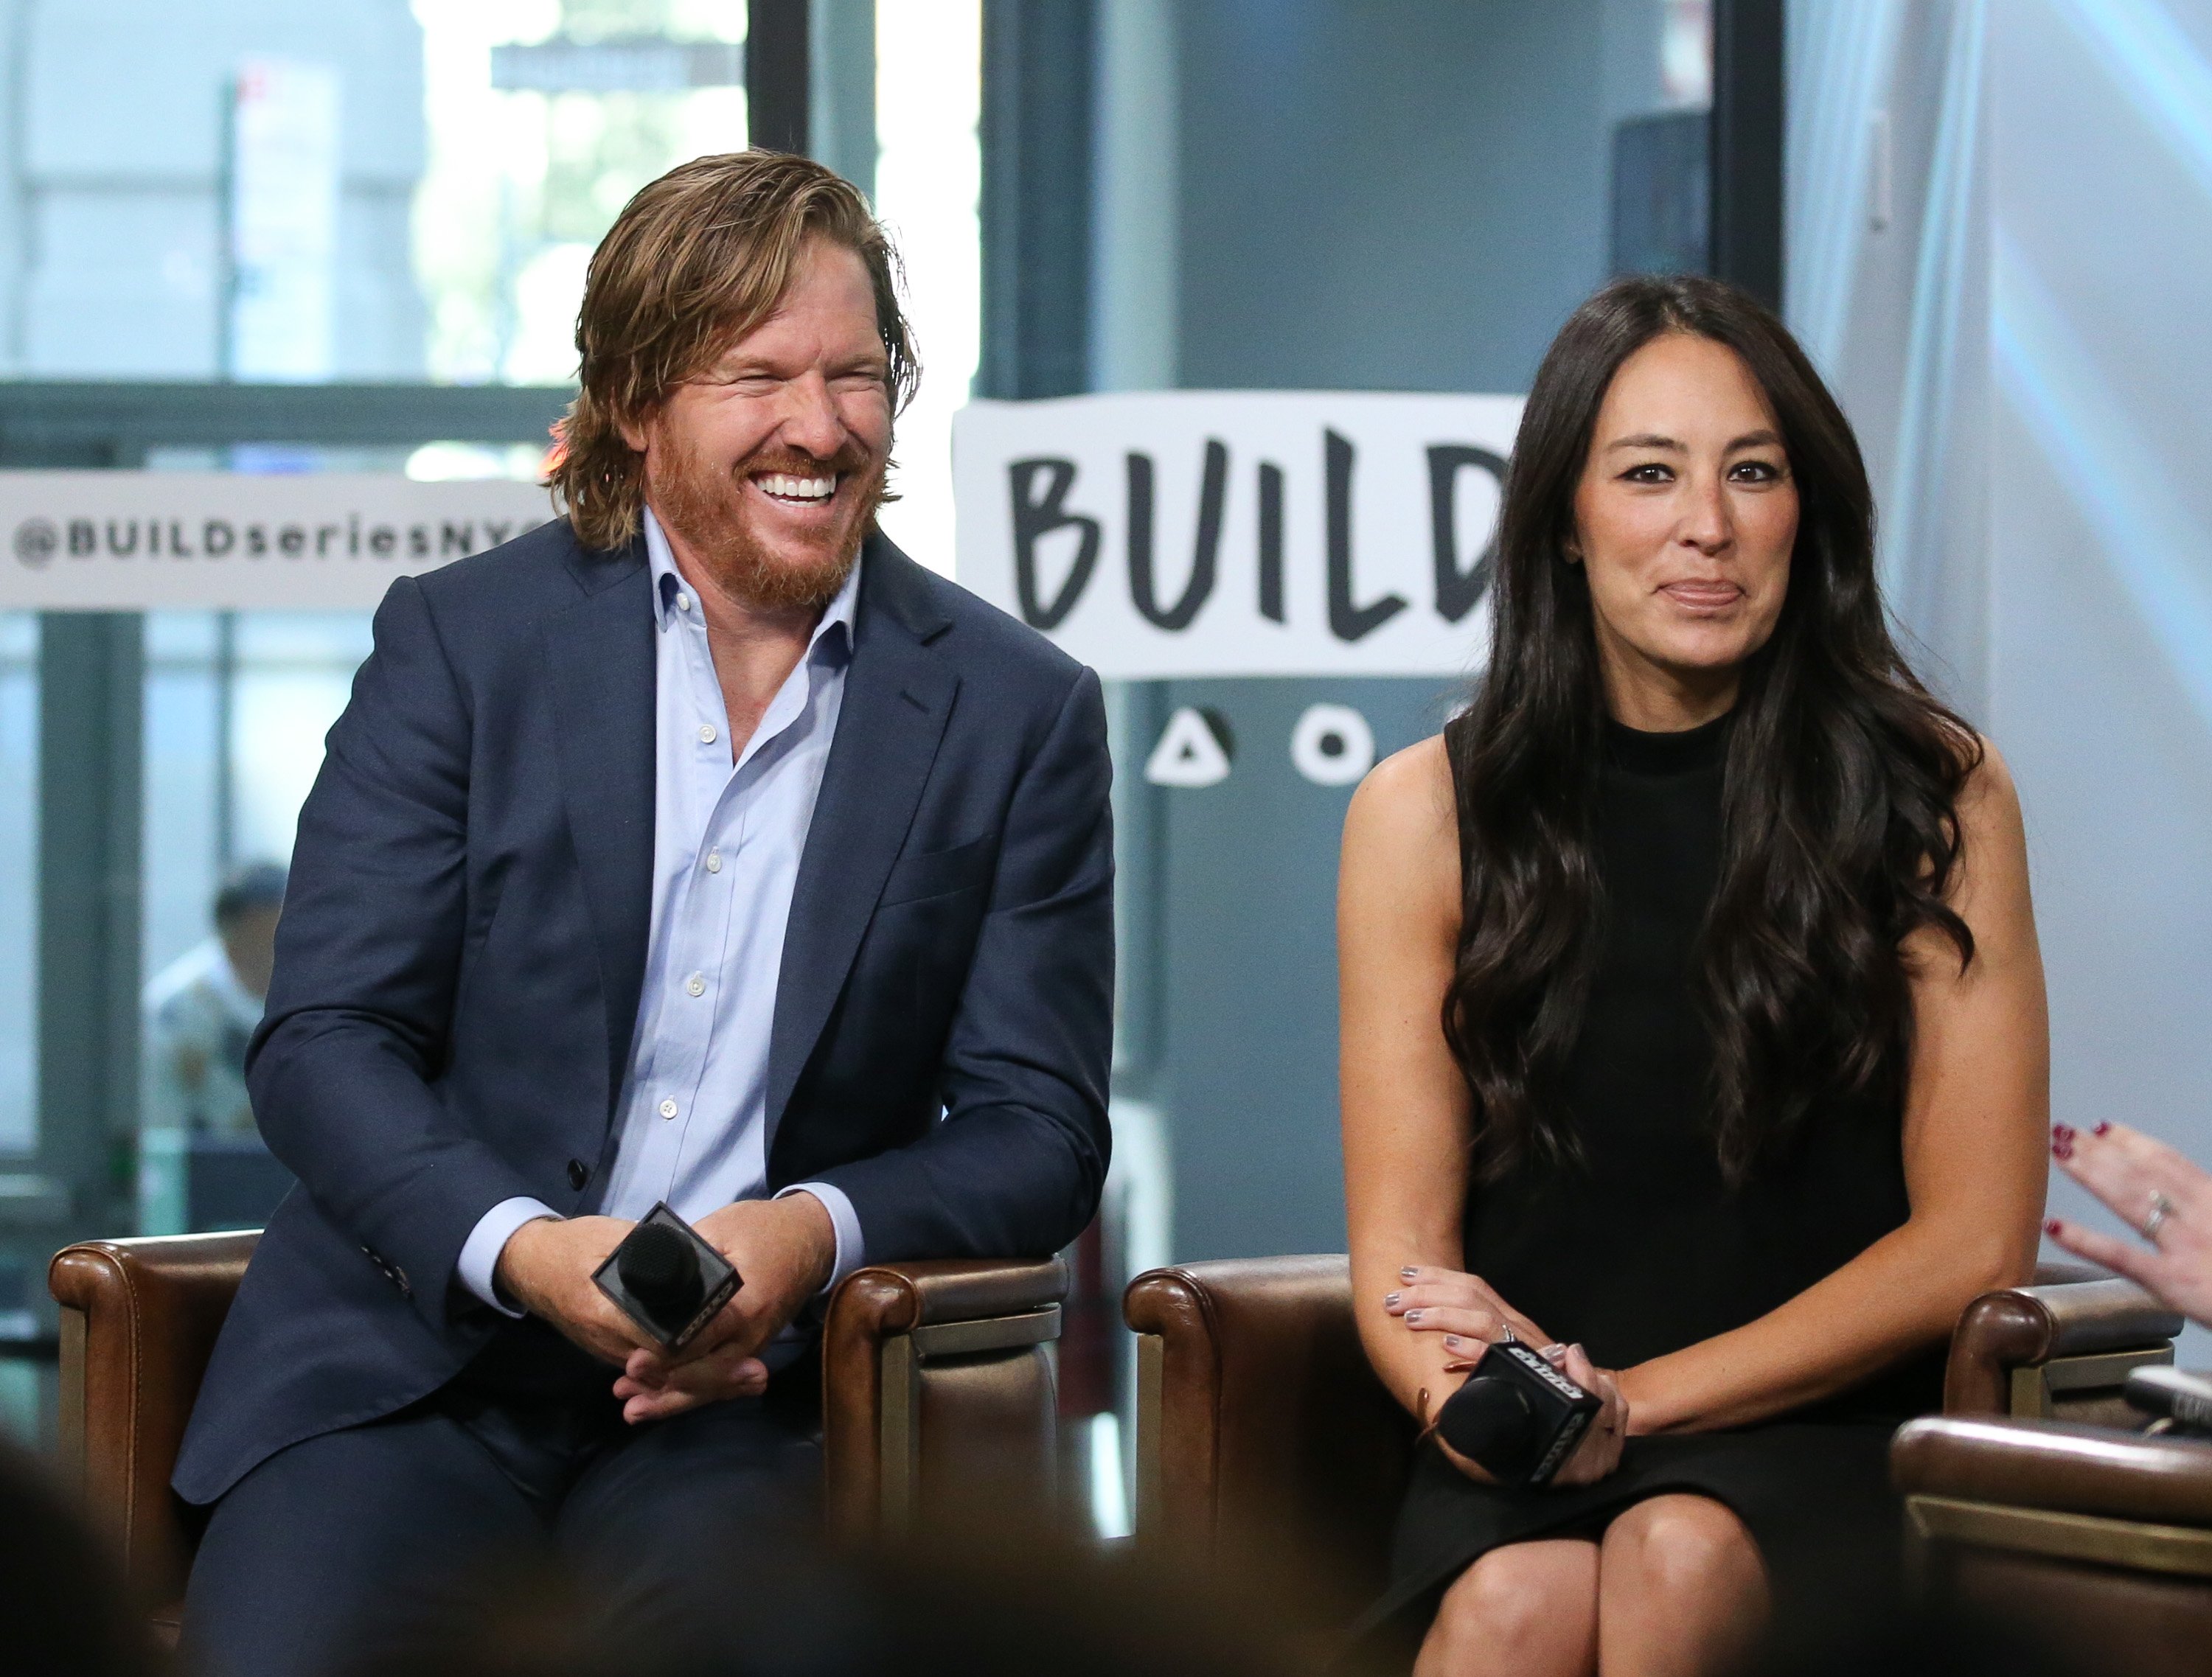  Chip Gaines and Joanna Gaines discuss new book, "Capital Gaines: Smart Things I Learned Doing Stupid Stuff" at Build Studio on October 18, 2017. | Photo: GettyImages